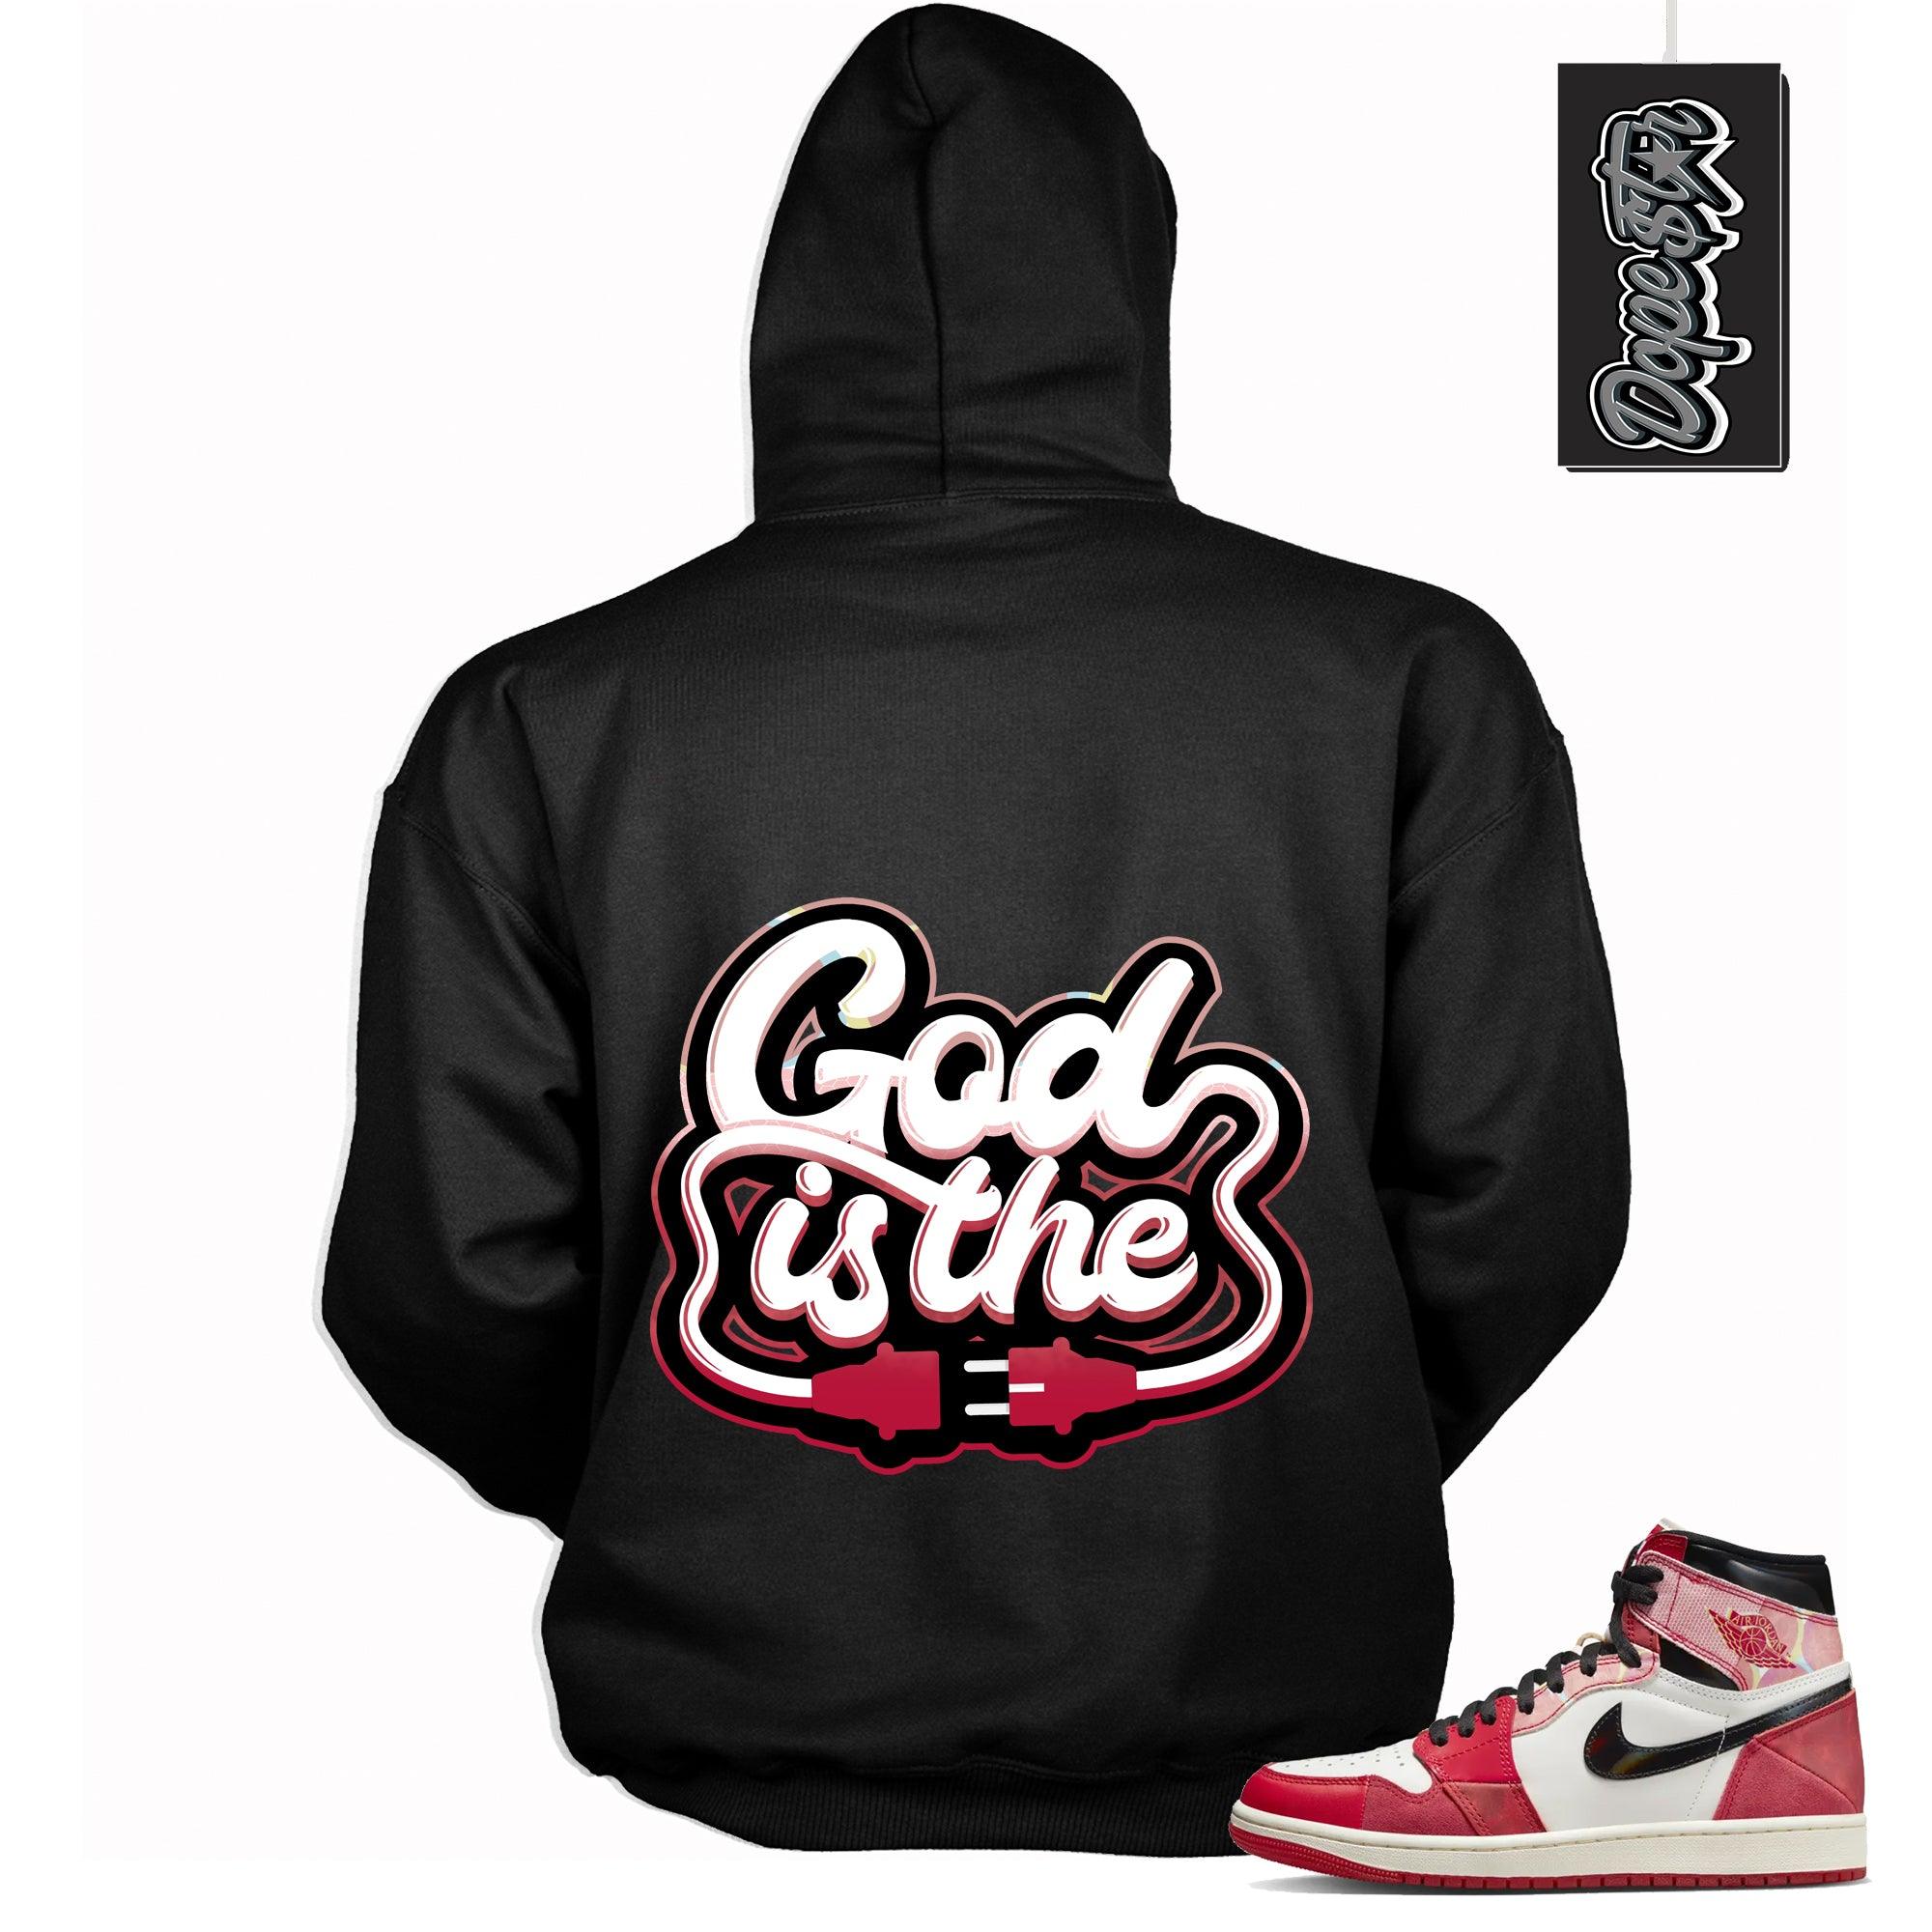 Cool Black Graphic Hoodie with “ GOD IS THE “ print, that perfectly matches AIR JORDAN 1 Retro High OG NEXT CHAPTER SPIDER-VERSE sneakers